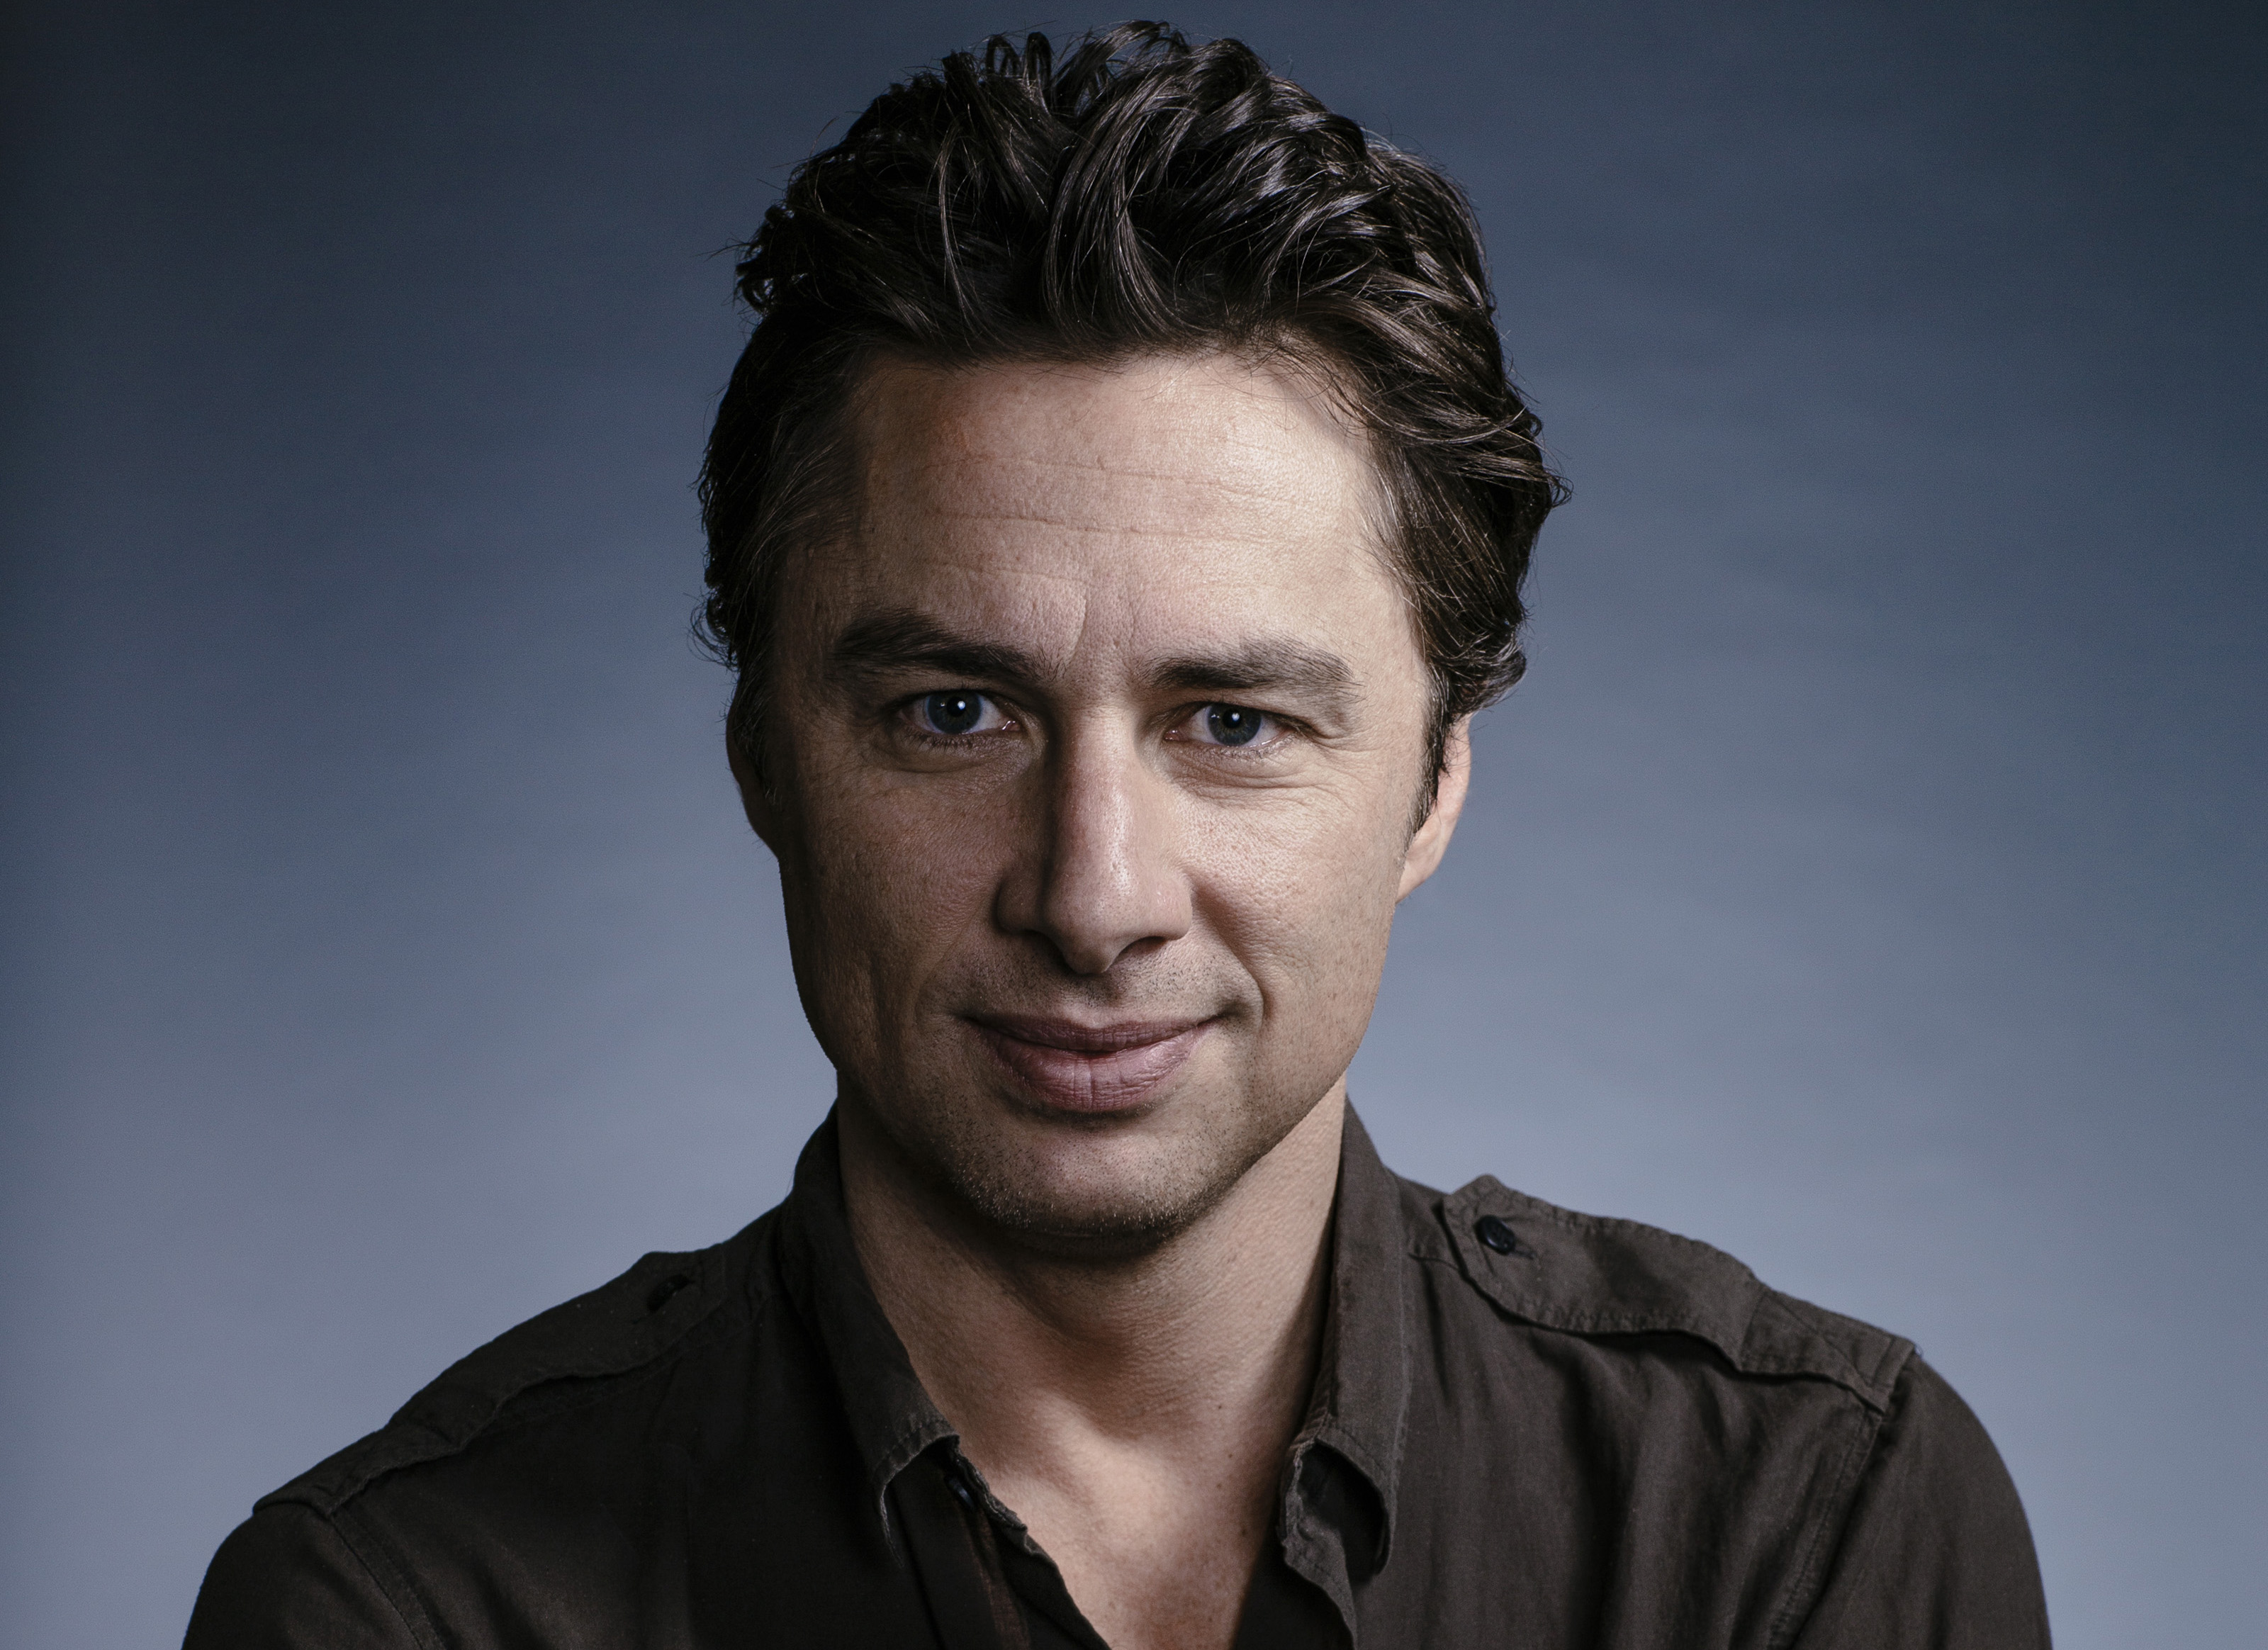 LOS ANGELES, CA - JUNE 23, 2014 - American Actor, Director and screenwriter Zach Braff poses at the Four Seasons Hotel, June 23, 2014, in Los Angeles, California. Braff first became known in 2001 for his role as Dr. John Dorian on the television series Scrubs, for which he was nominated for the Primetime Emmy Award for Outstanding Lead Actor in 2005. In 2004, Braff made his directorial debut with Garden State. He returned to his home state New Jersey to shoot the film, which was produced for $2.5 million. In April 2013, Braff announced he was launching a Kickstarter campaign to raise funds to shoot a new film, titled Wish I Was Here. (Photo by Bret Hartman/For The Washington Post)